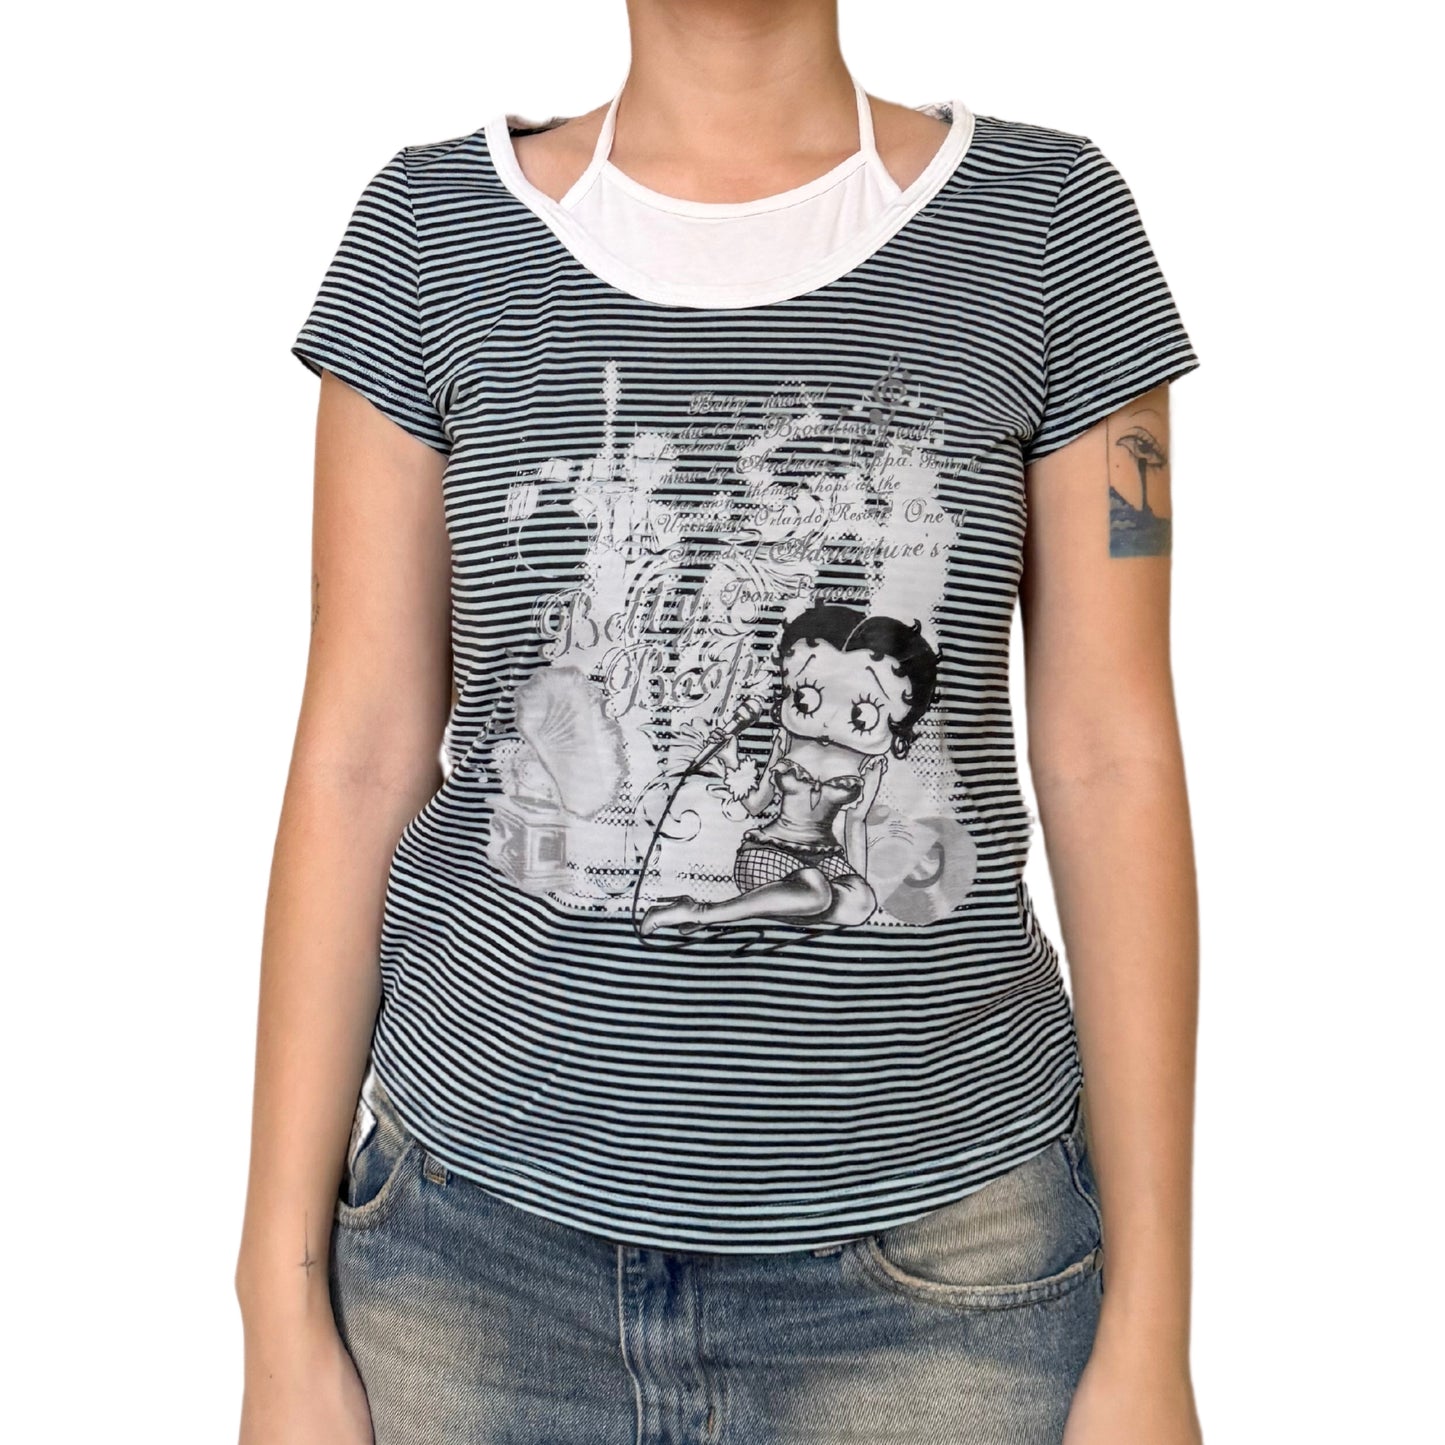 Y2k Betty Boop Blue Striped Graphic Top